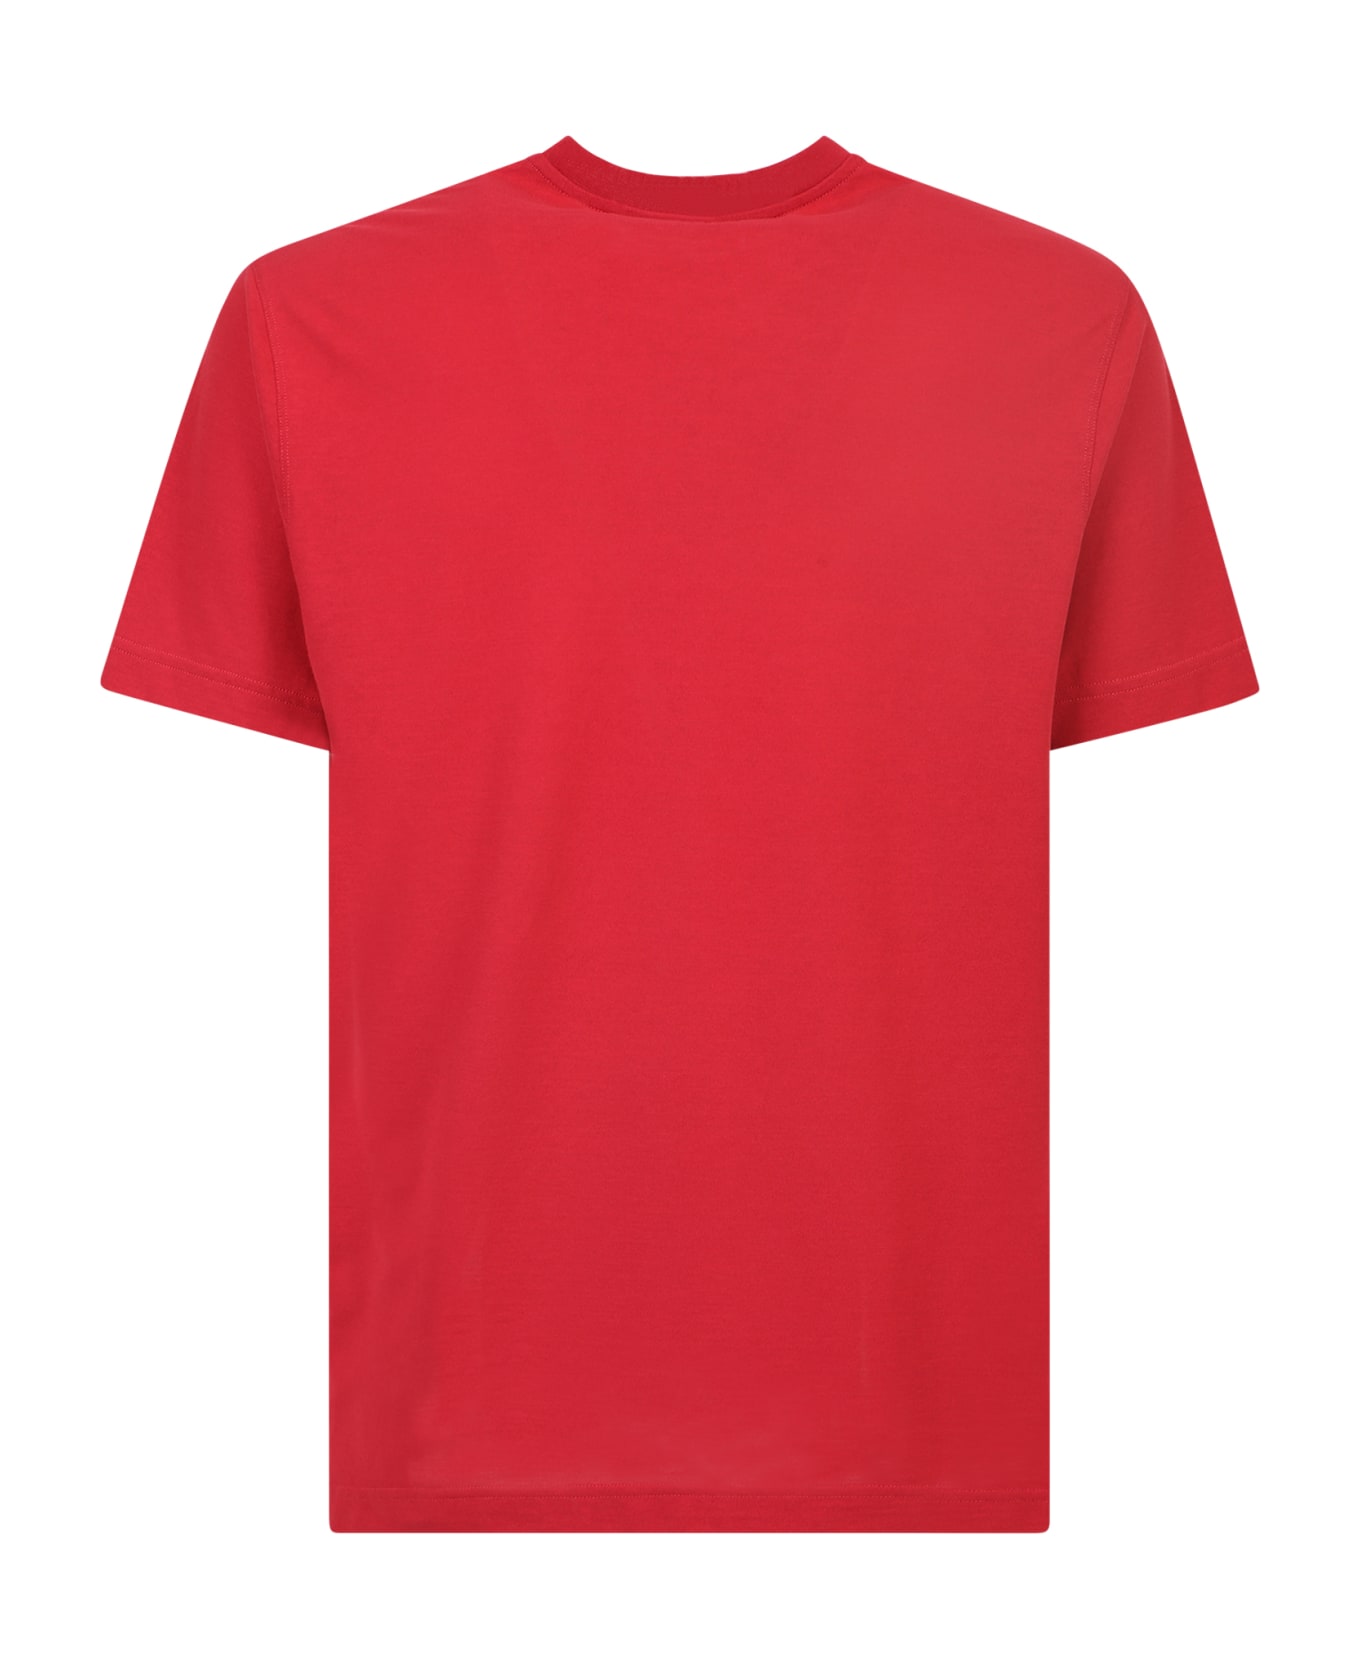 Zanone Rollneck T-shirt - Red